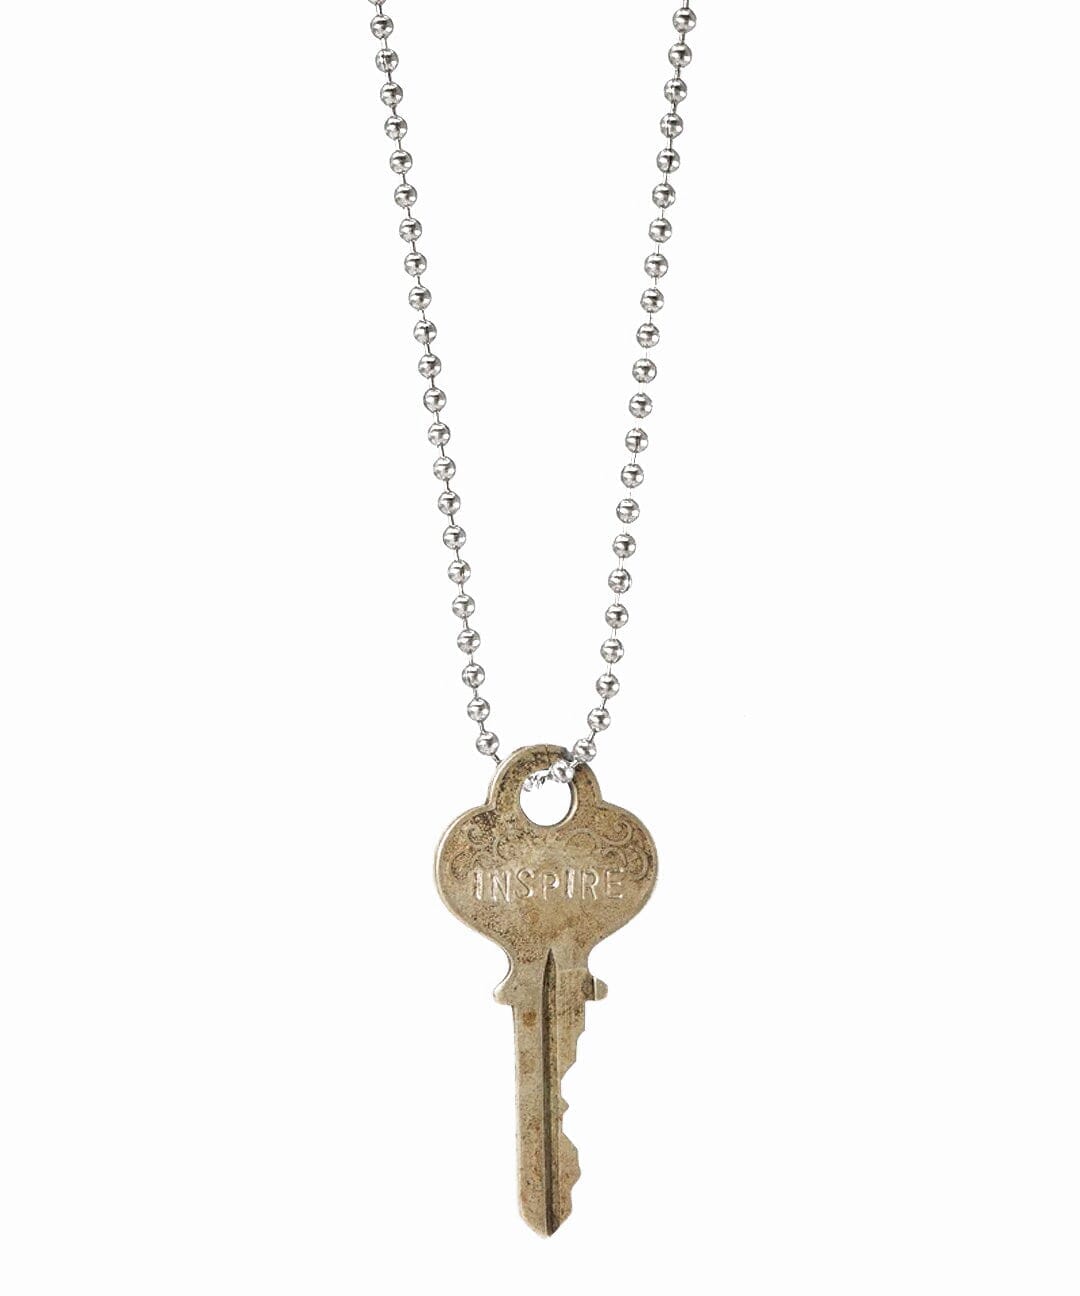 Vintage Classic Ball Chain Key Necklace